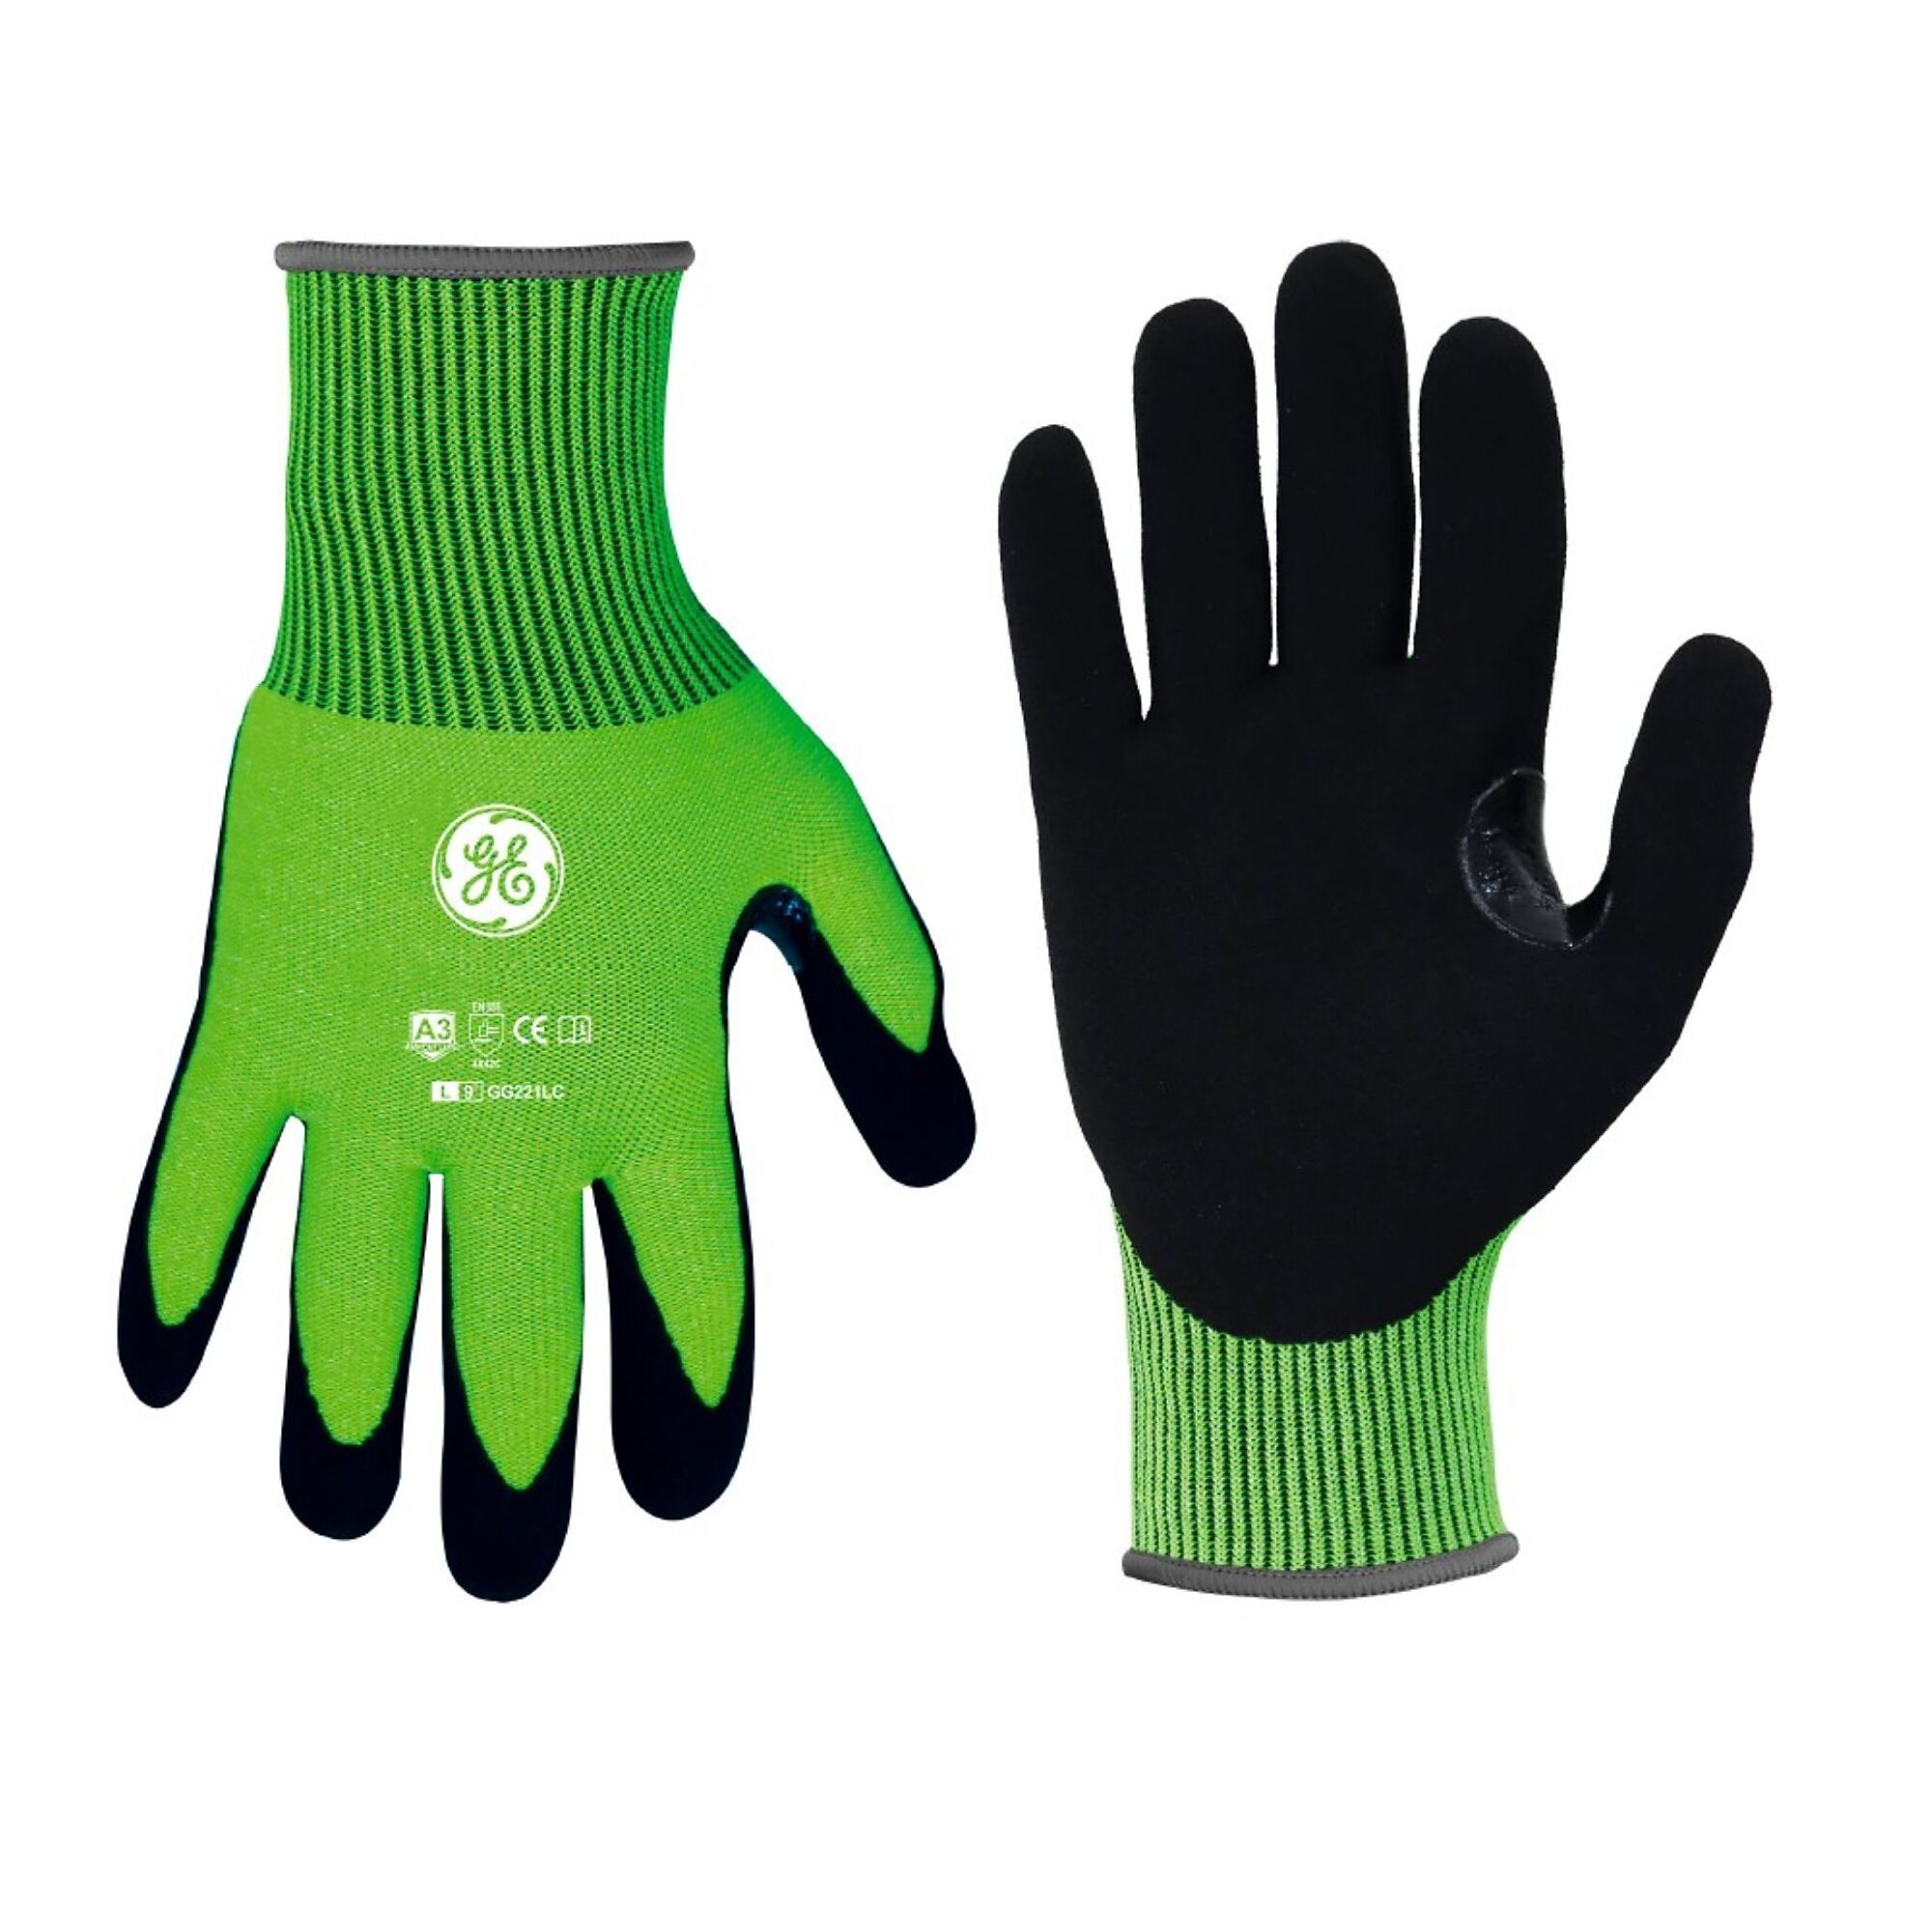 General Electric, Unisex Dipped Gloves Black/High-Vis Grn L 12 pair, Size L, Included (qty.) 12, Model GG221L